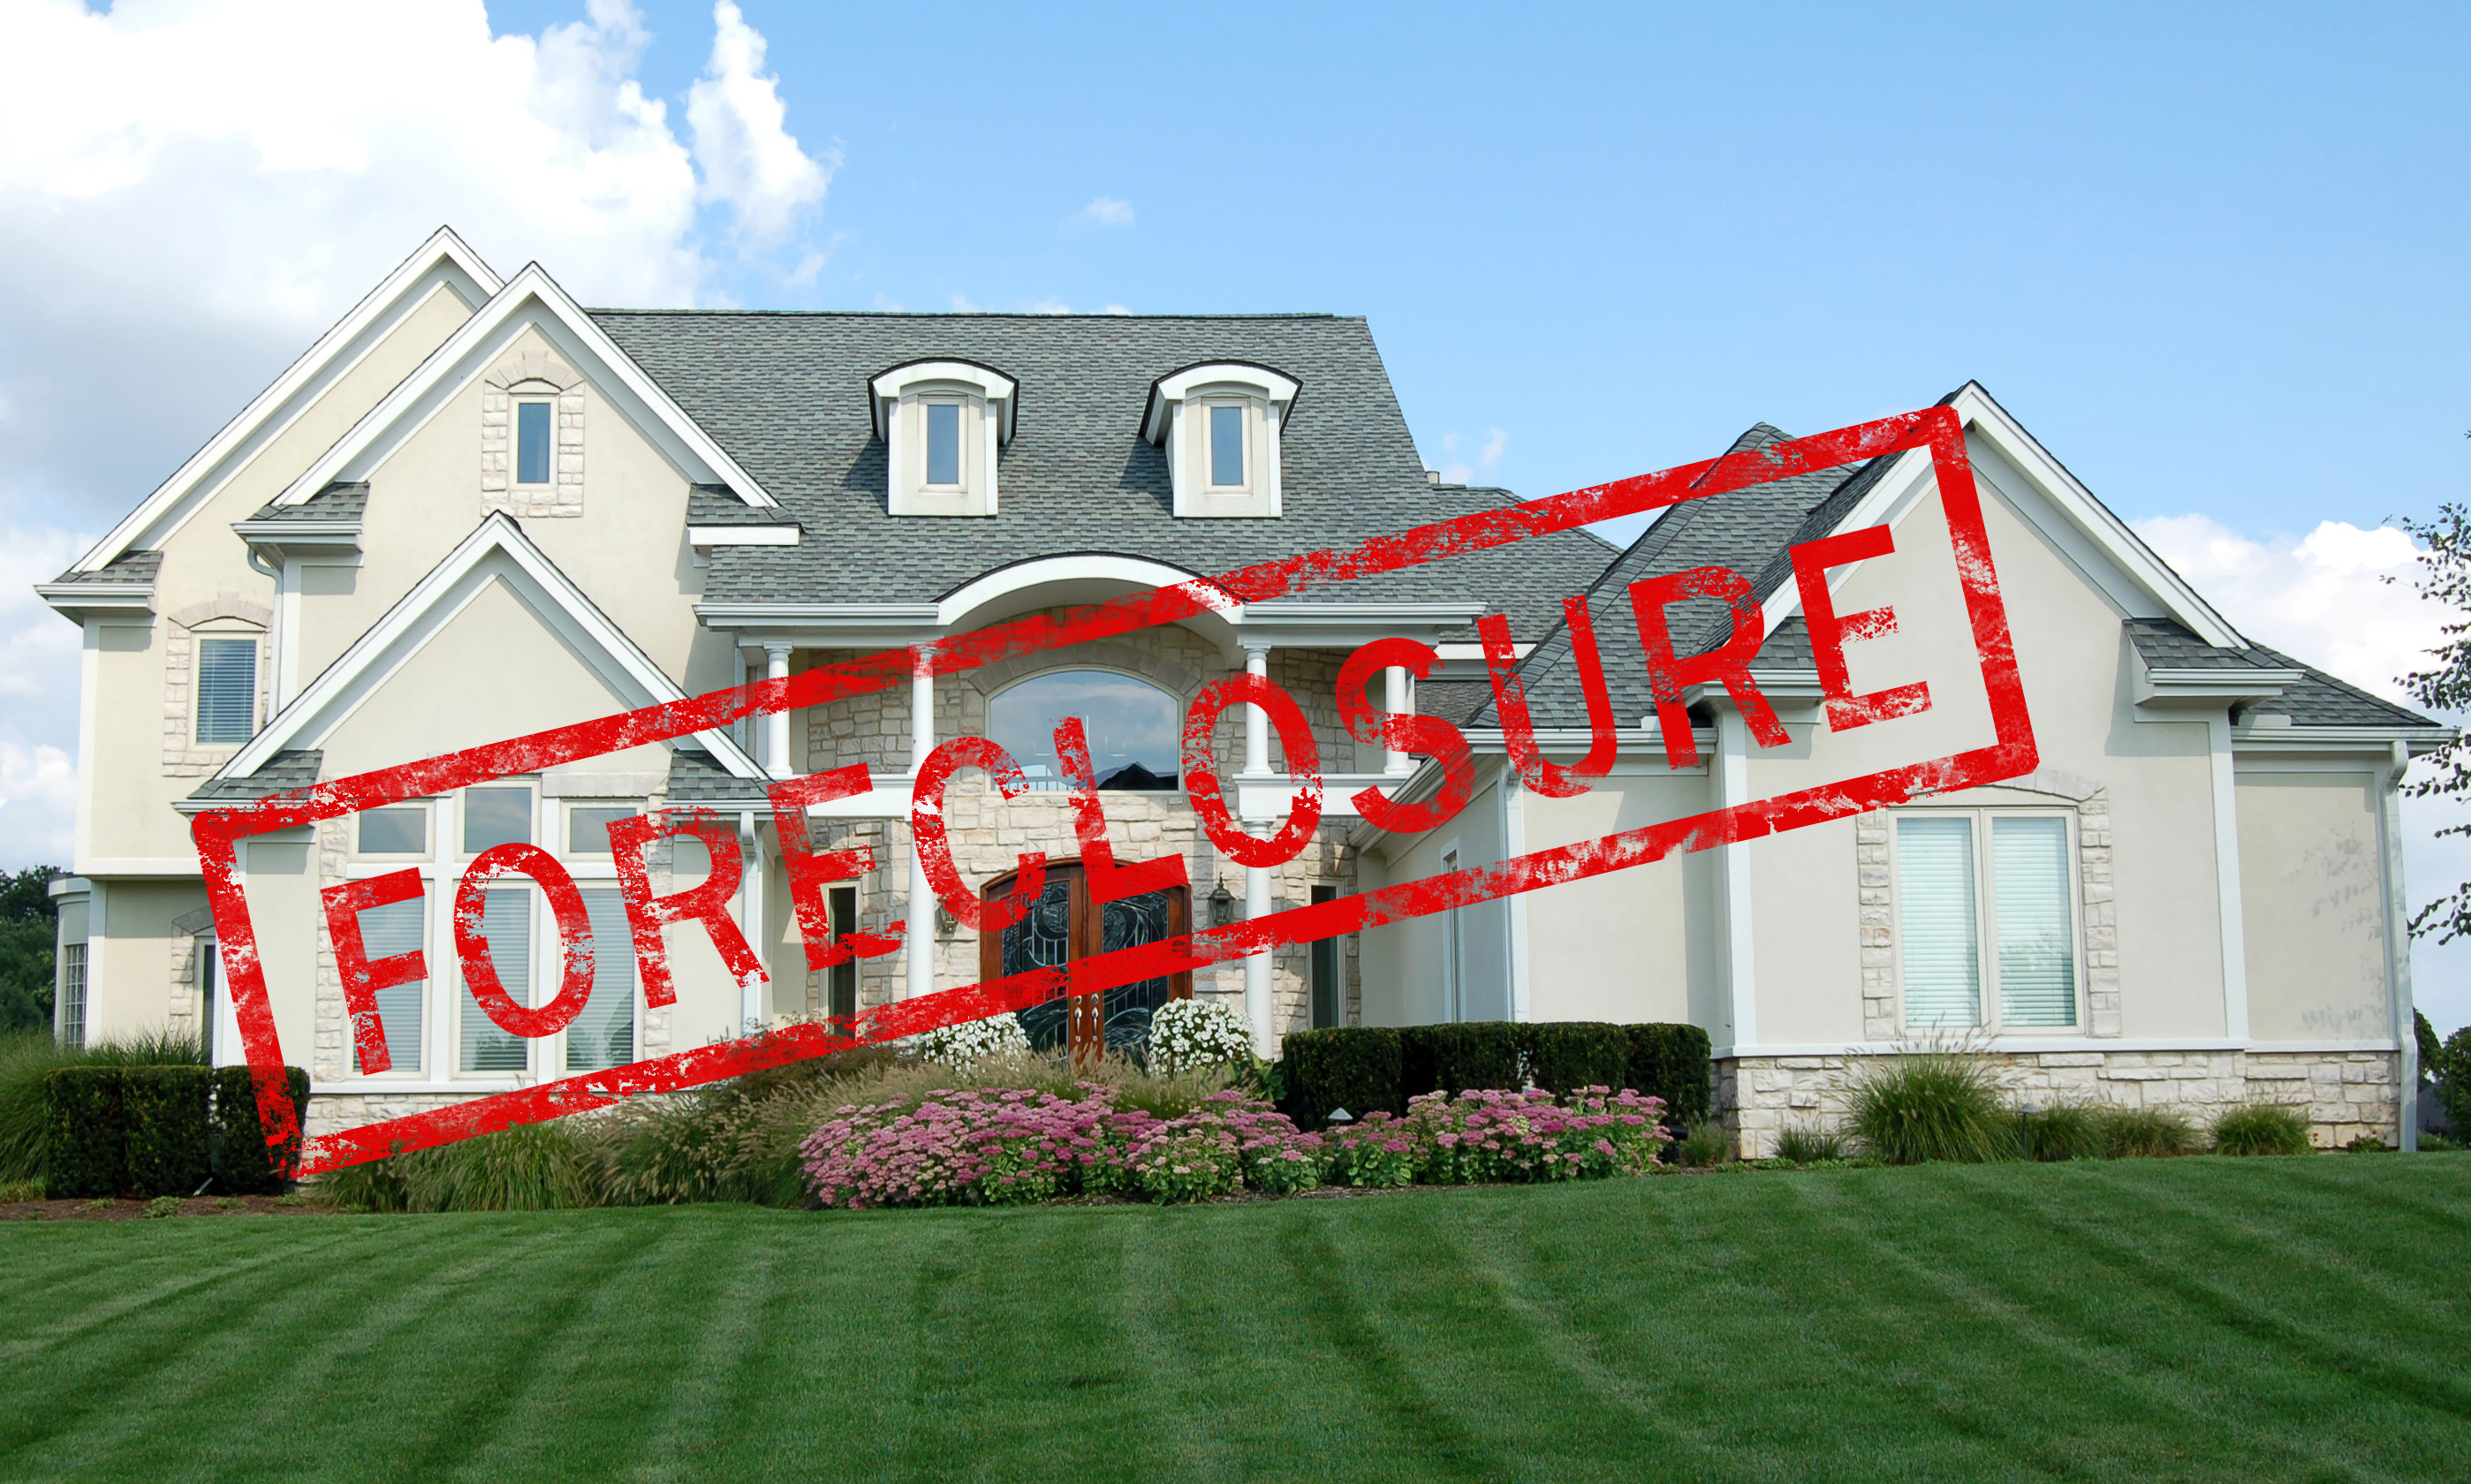 Call West Valley Appraisal Services to order appraisals regarding Maricopa foreclosures